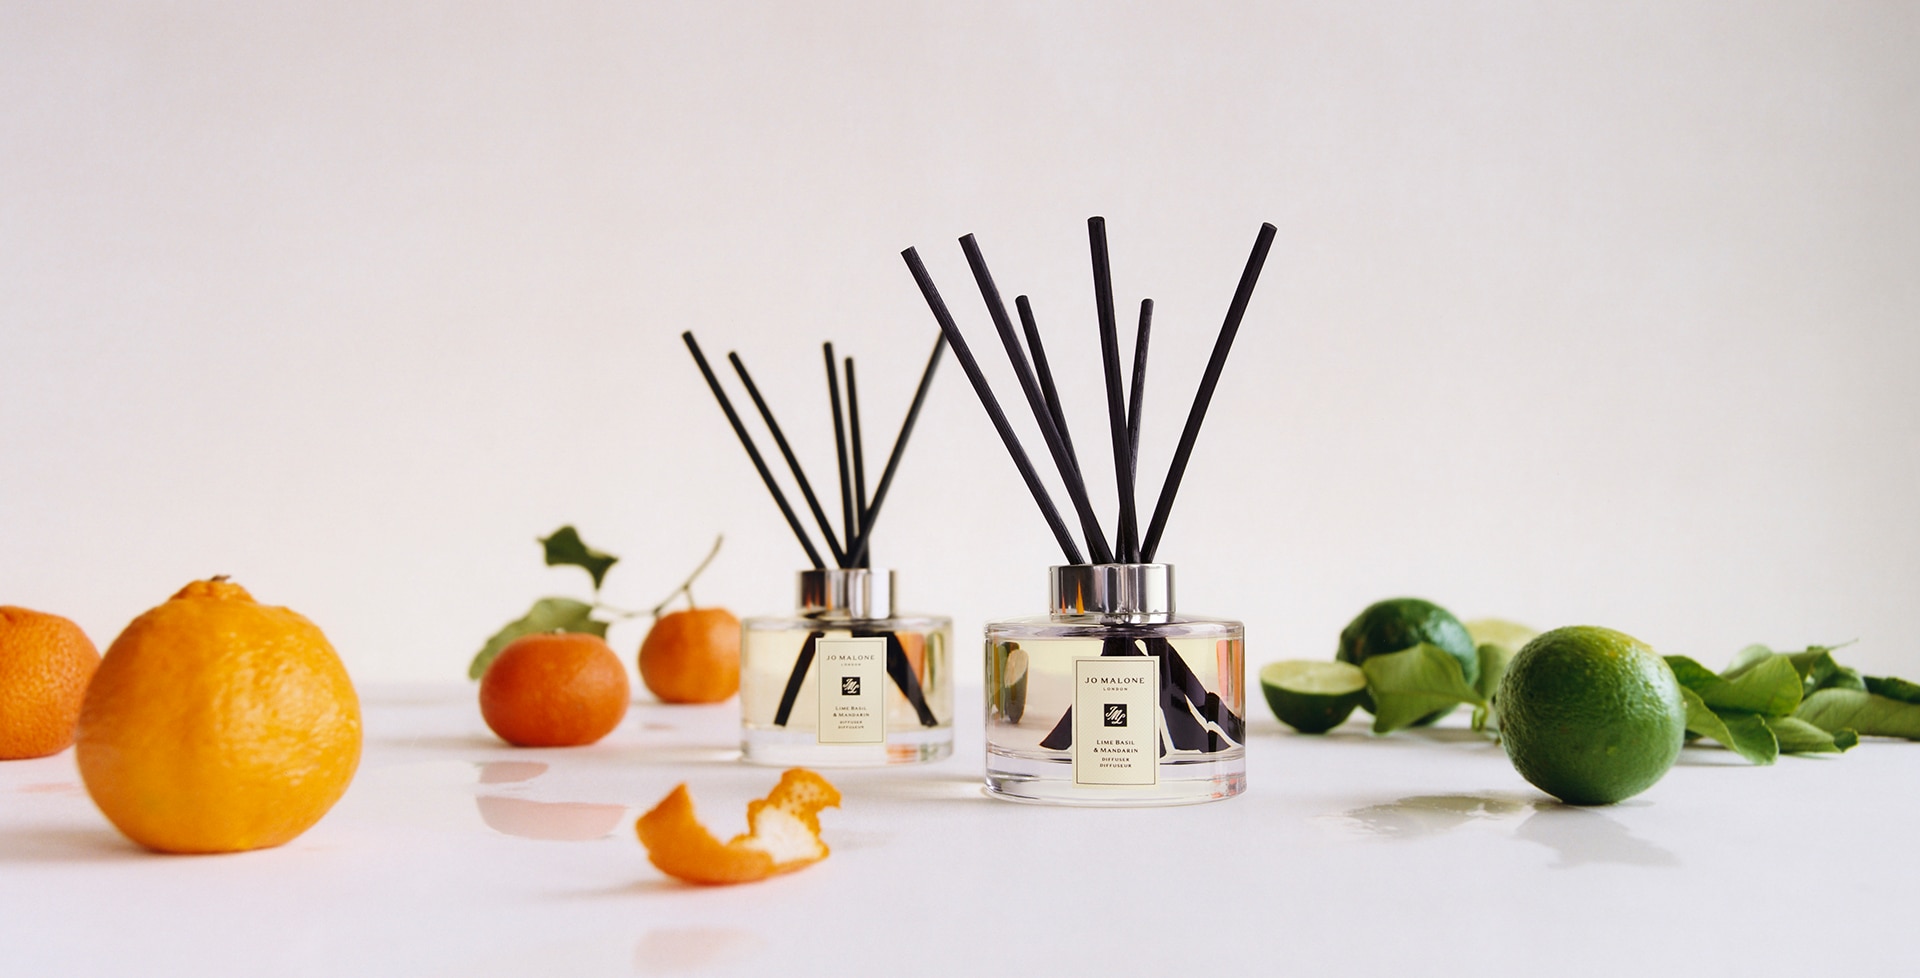 Jo Malone London Lime Basil & Mandarin Diffuser surrounded by oranges and limes